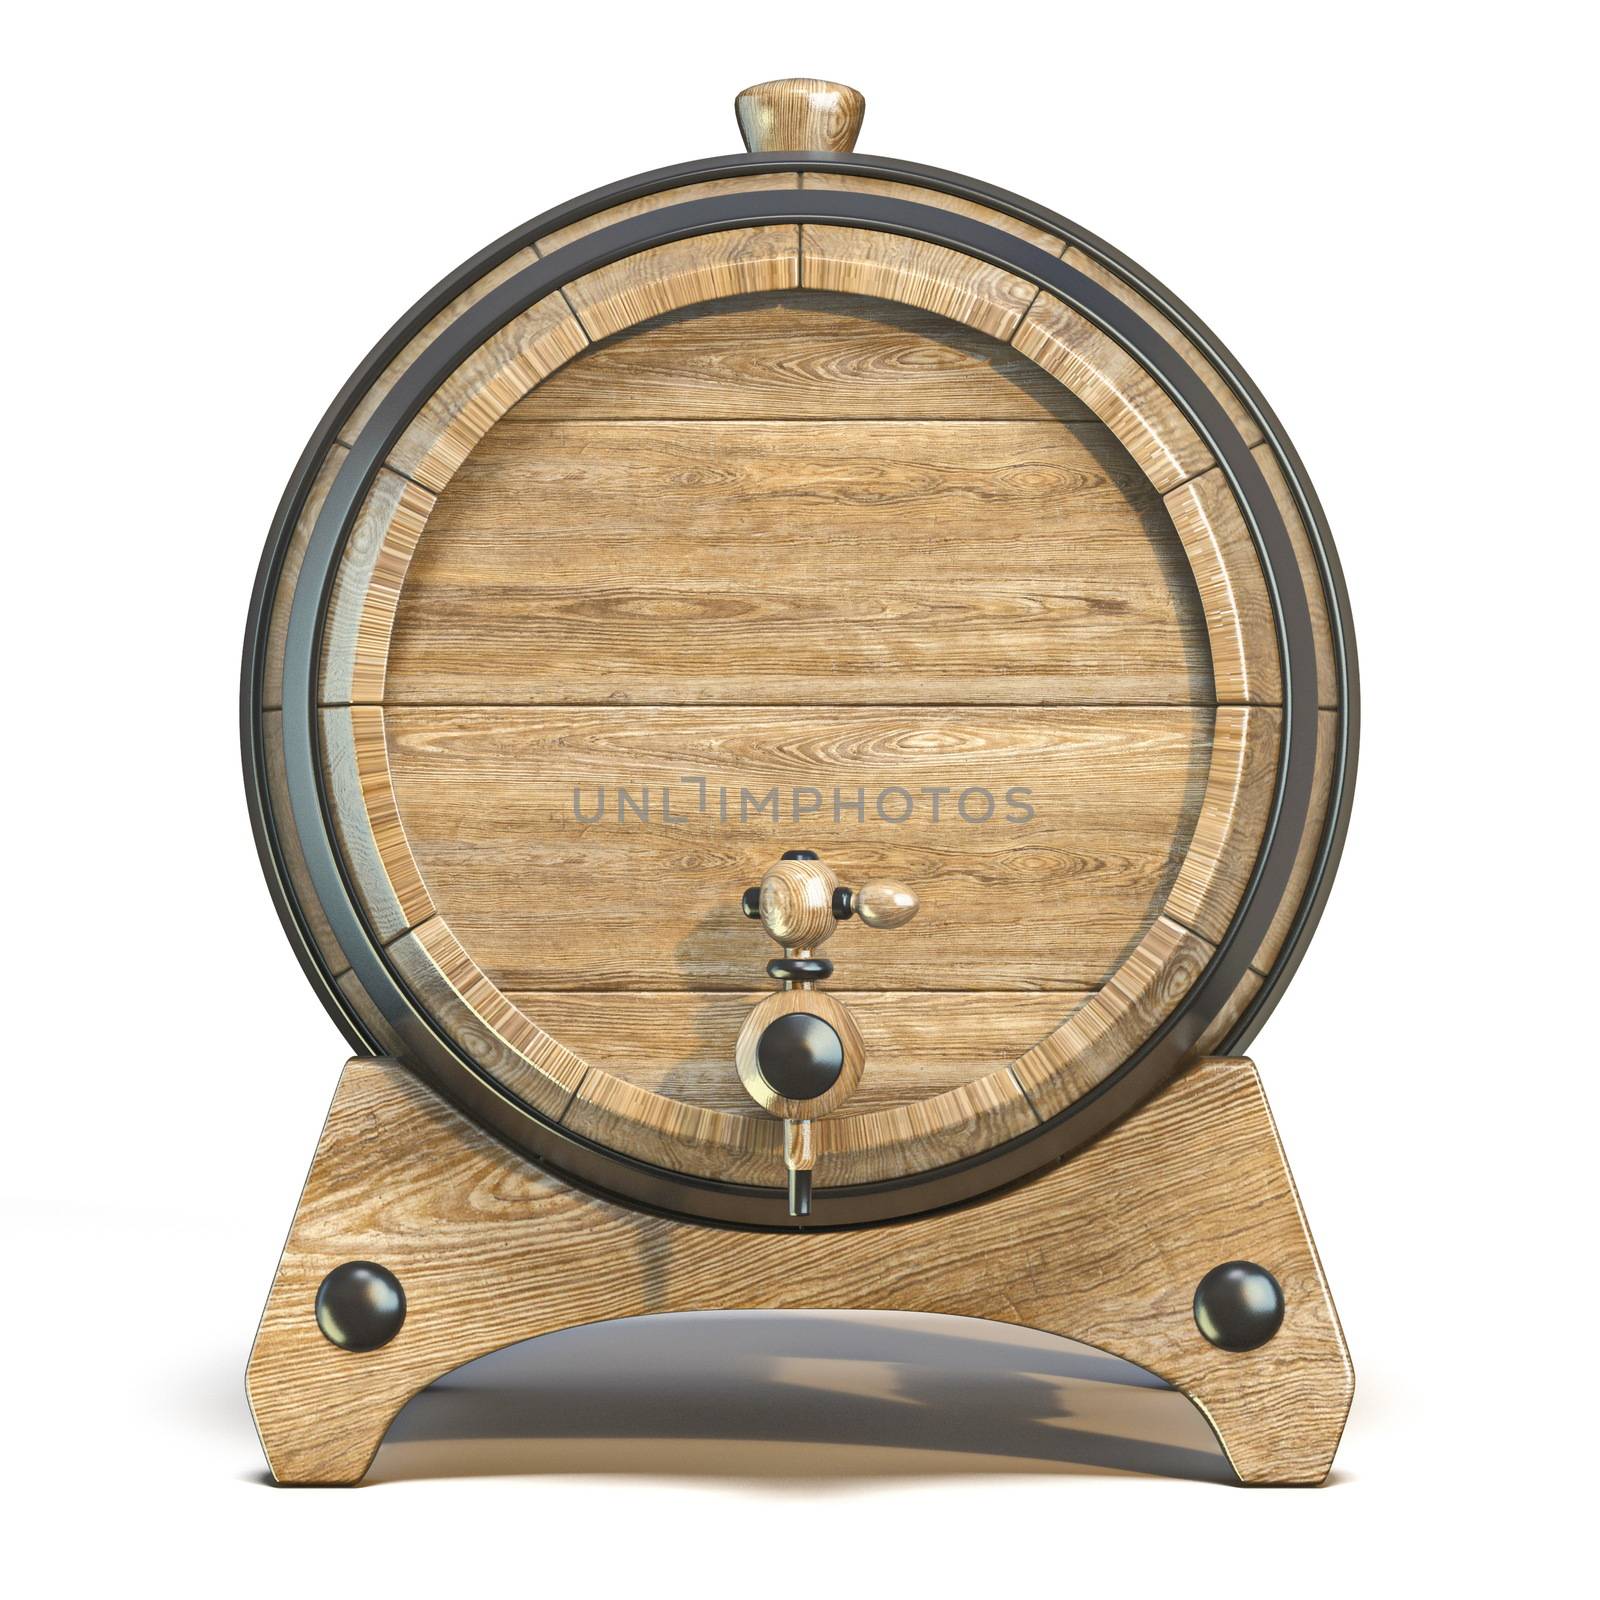 Wooden barrel on wooden stand 3D render illustration isolated on white background